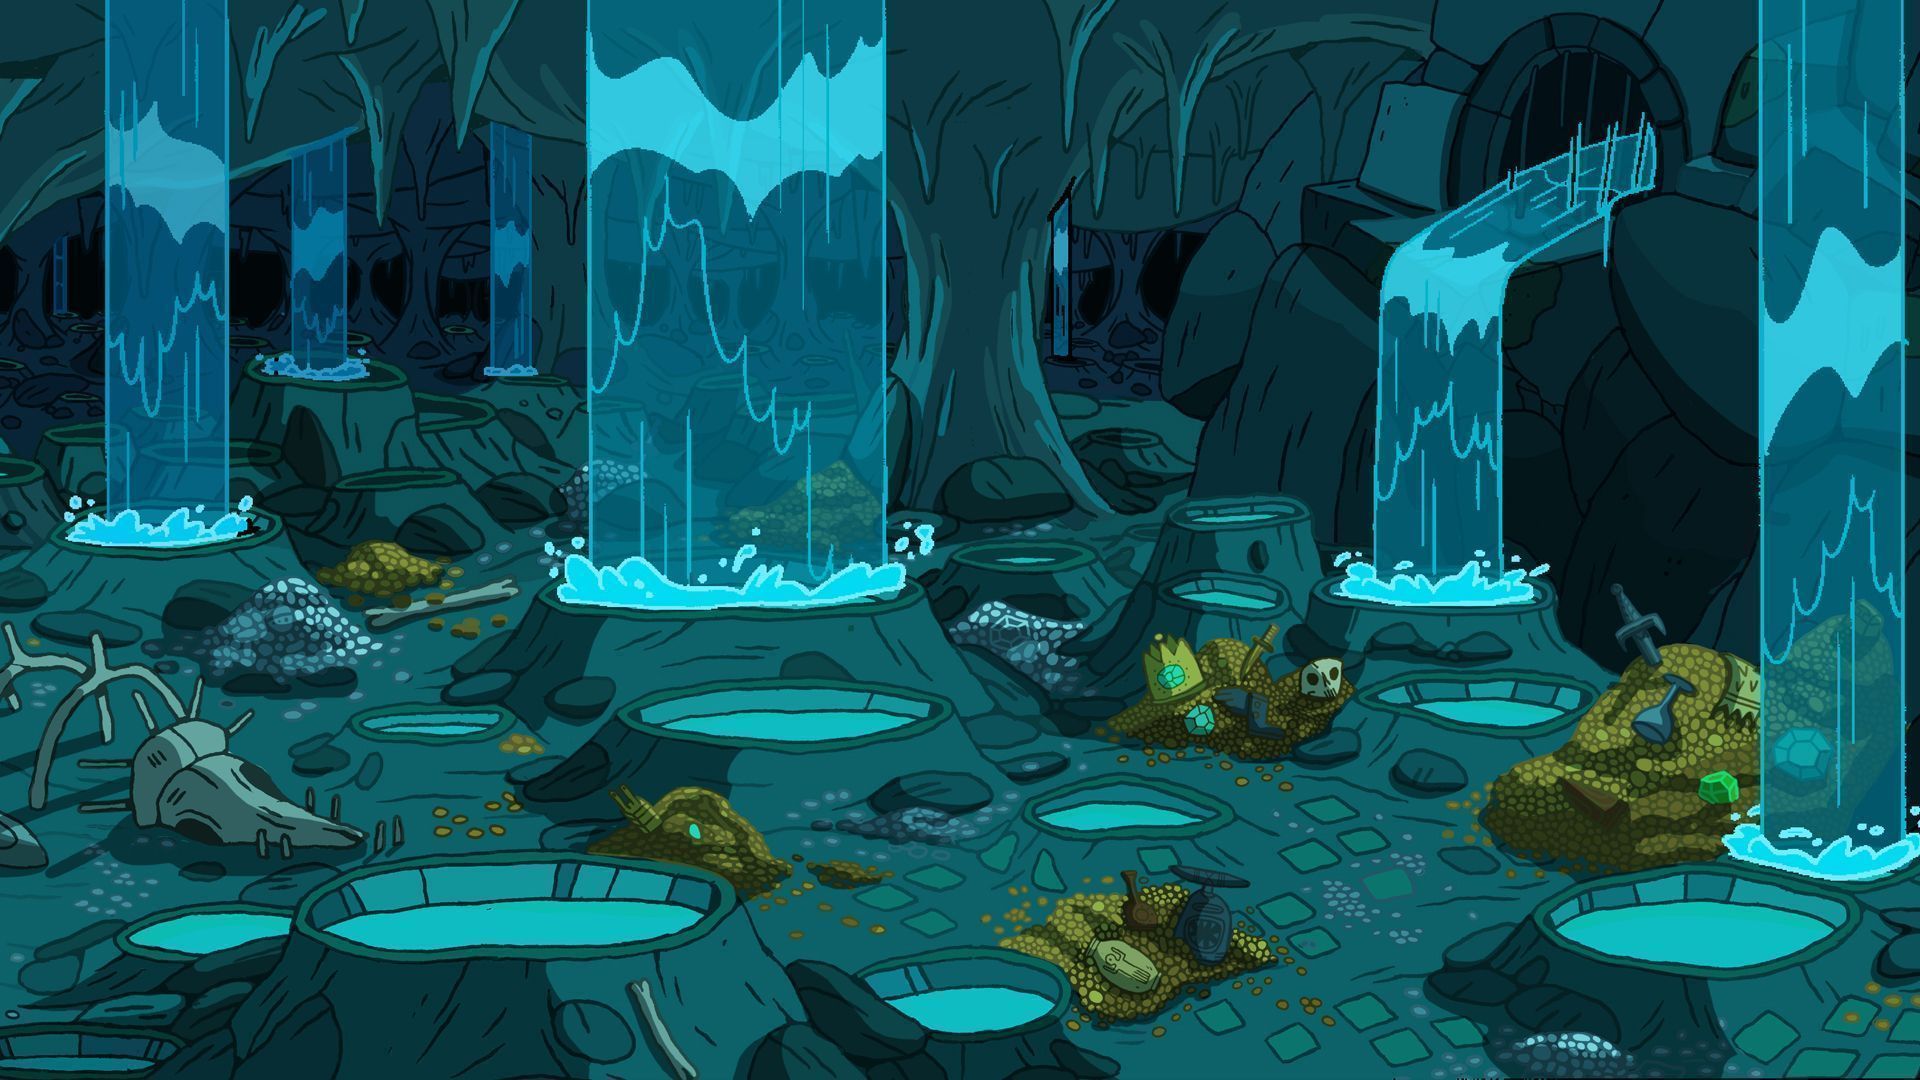 The entrance to the underground cave - Adventure Time